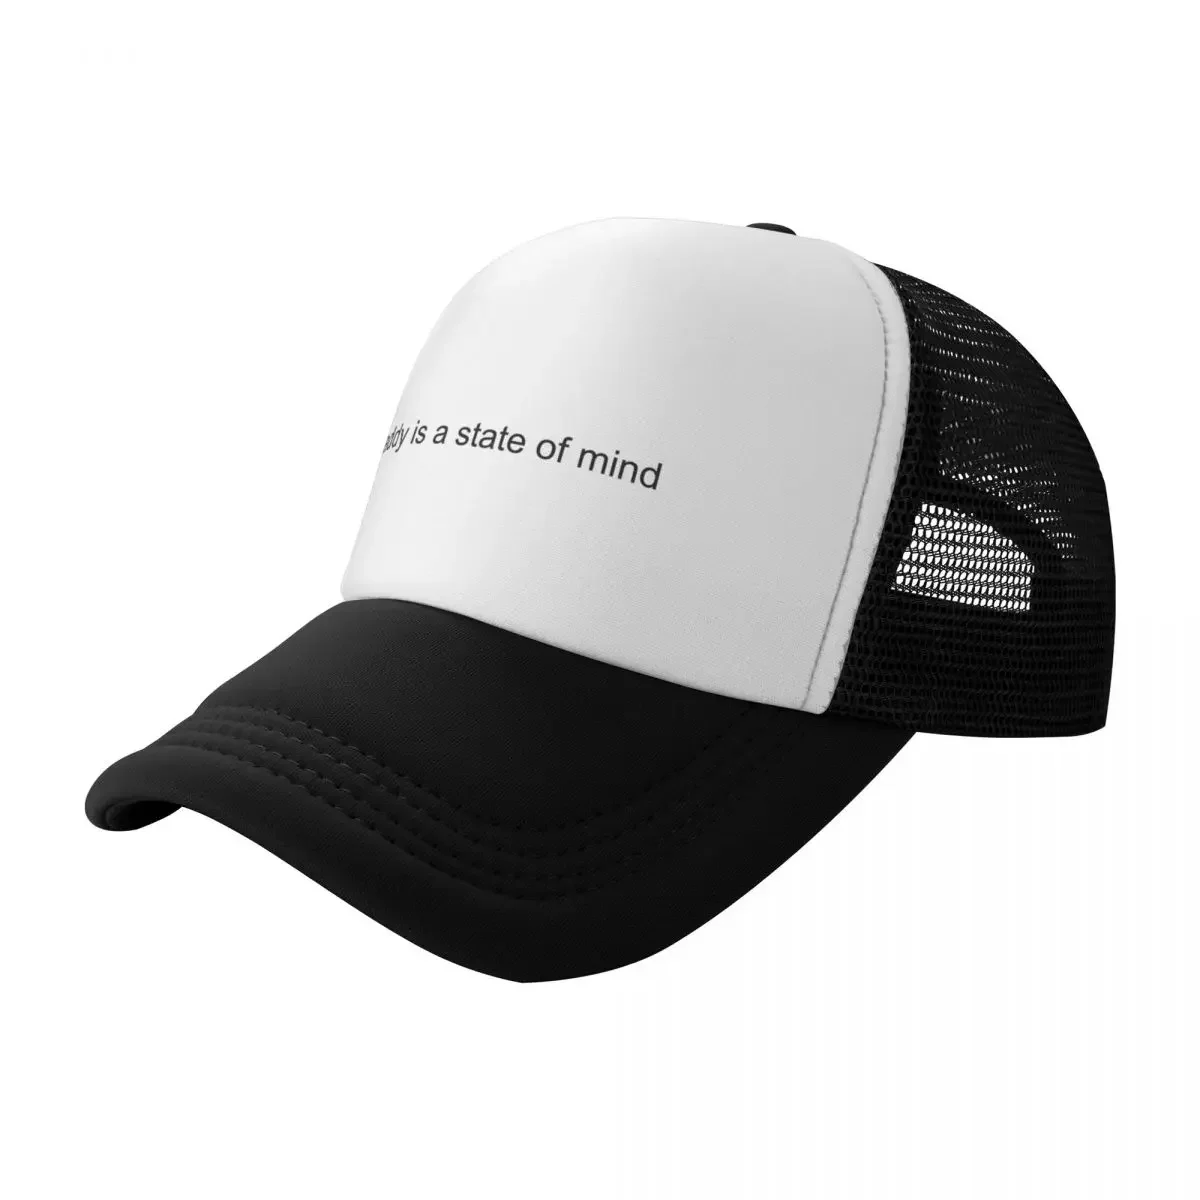 

Daddy is a state of mind (black) Baseball Cap New In Hat Hat Man For The Sun Trucker Cap Caps Male Women's